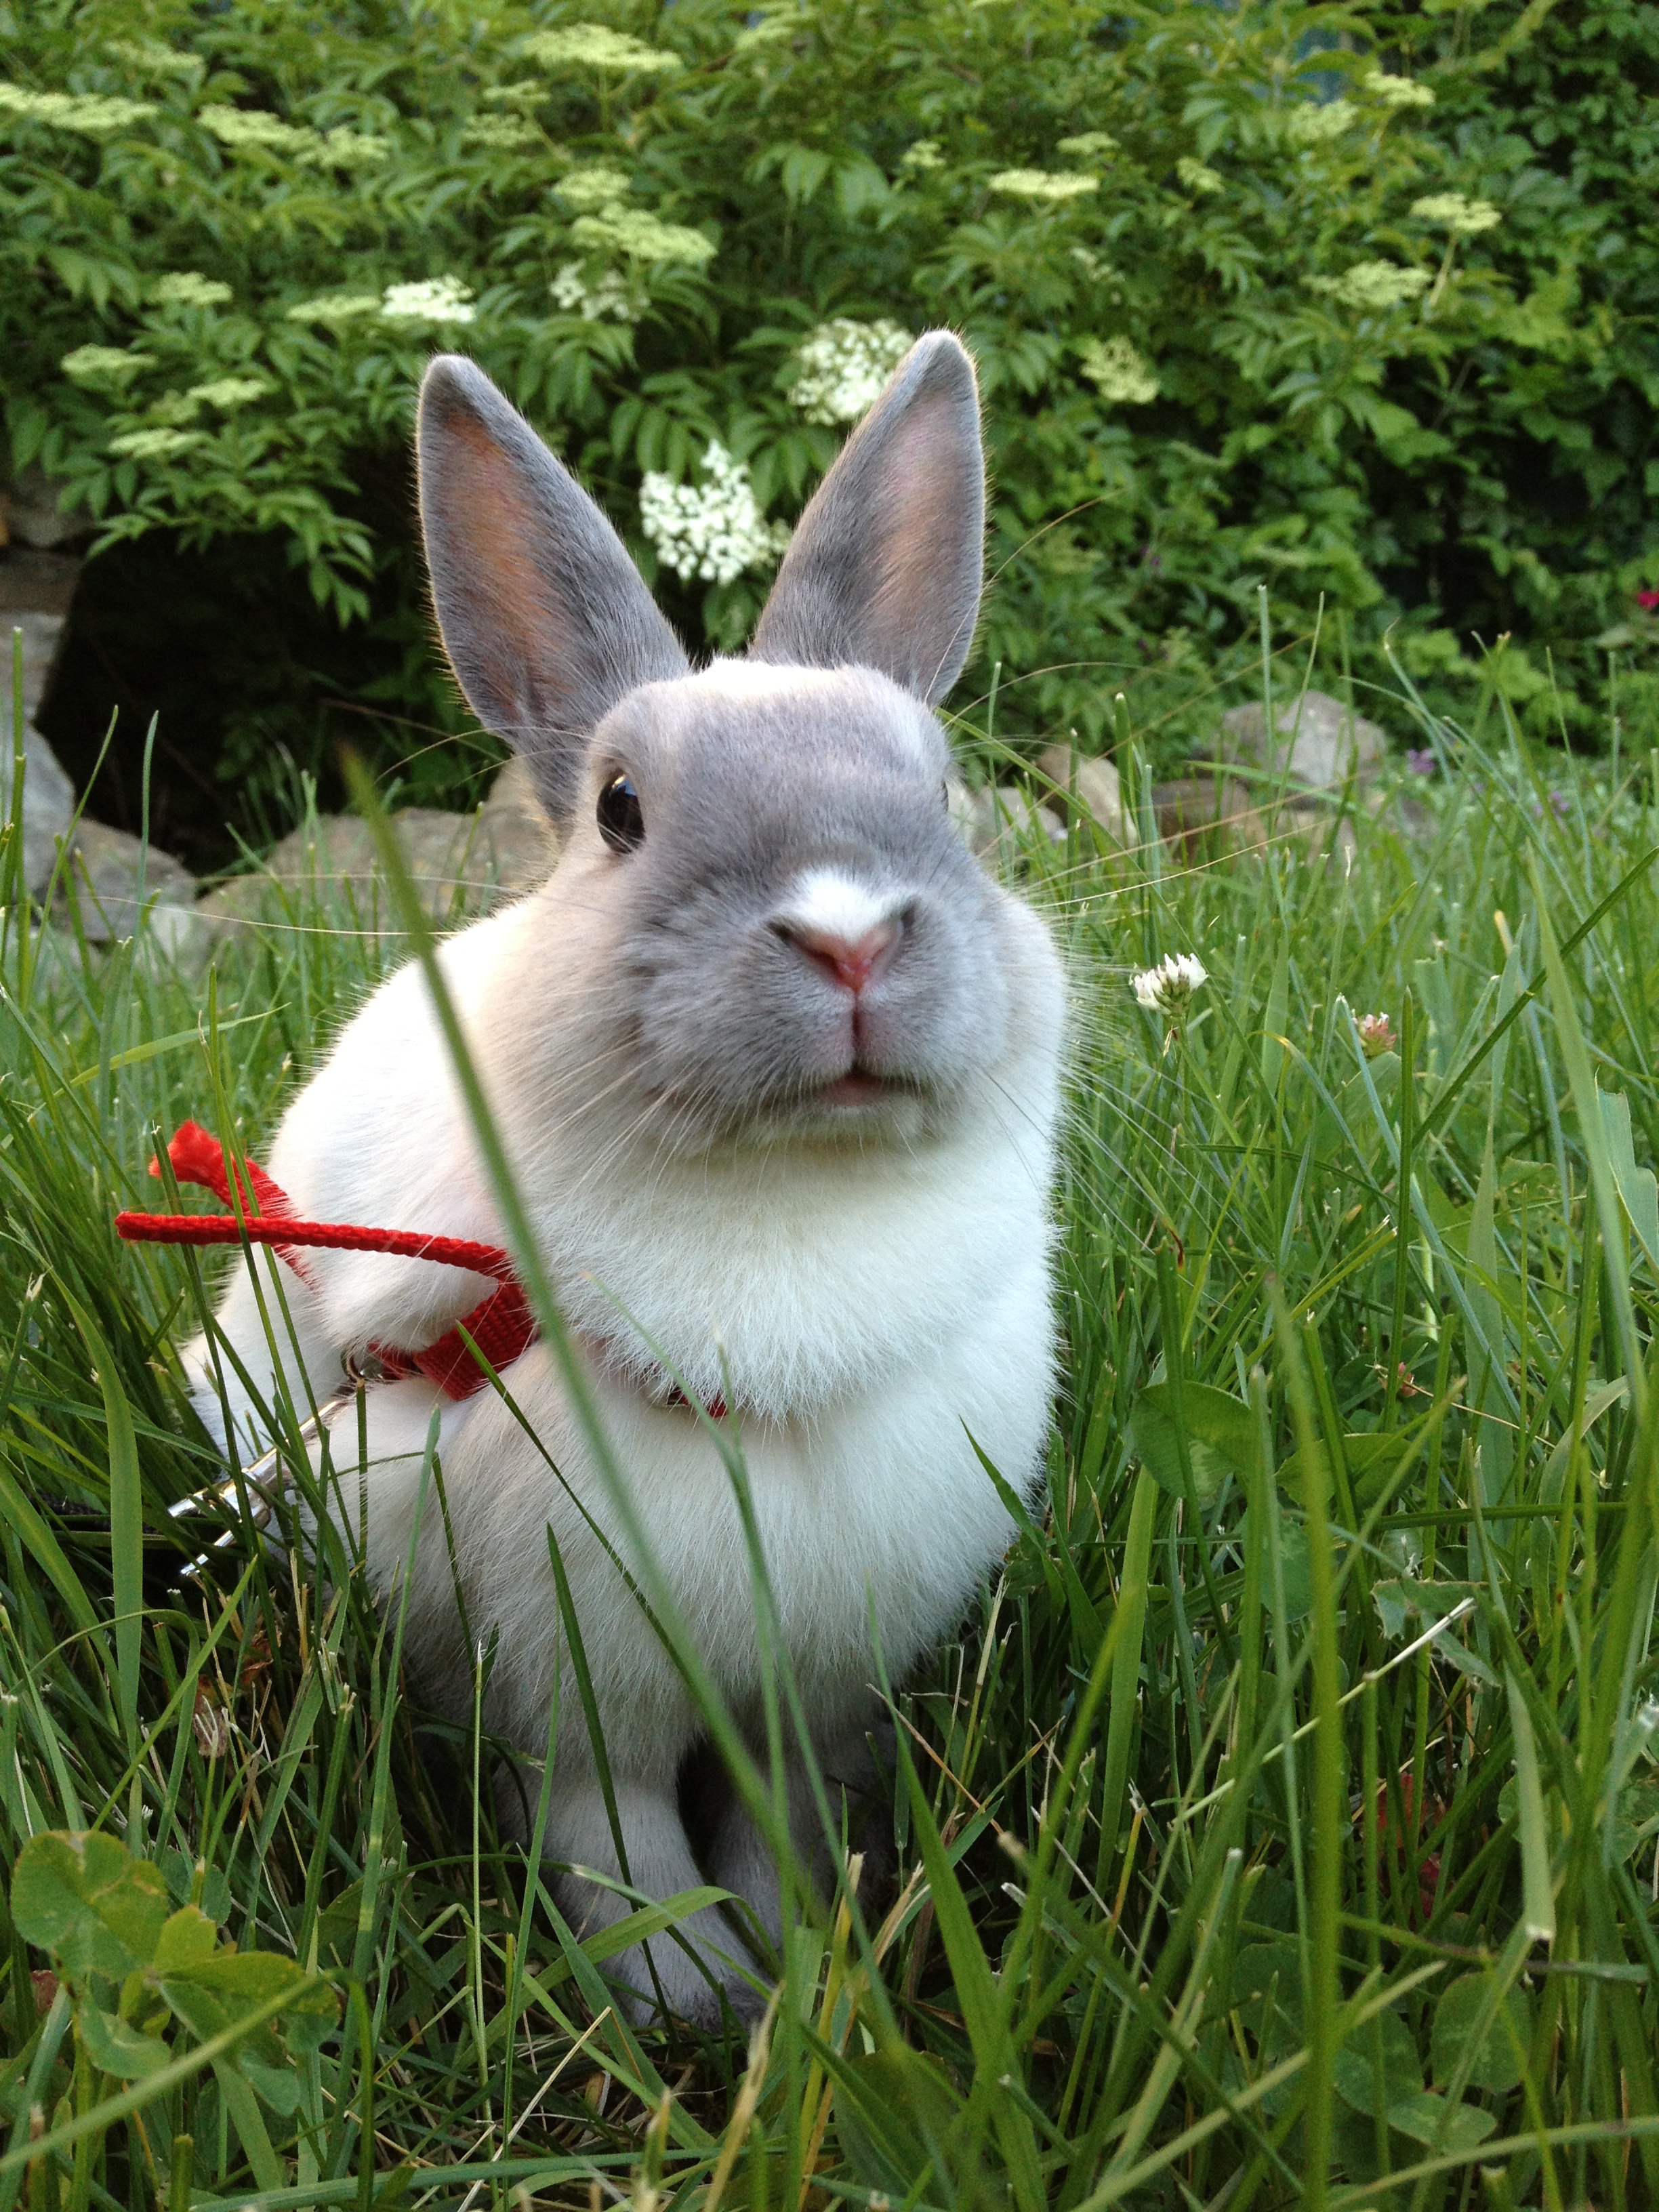 Photos Illustrating Two Sides of Bunny: One in Which He Sits Sweetly, Another in Which Grass Sticks Out of His Mouth While Eating 2